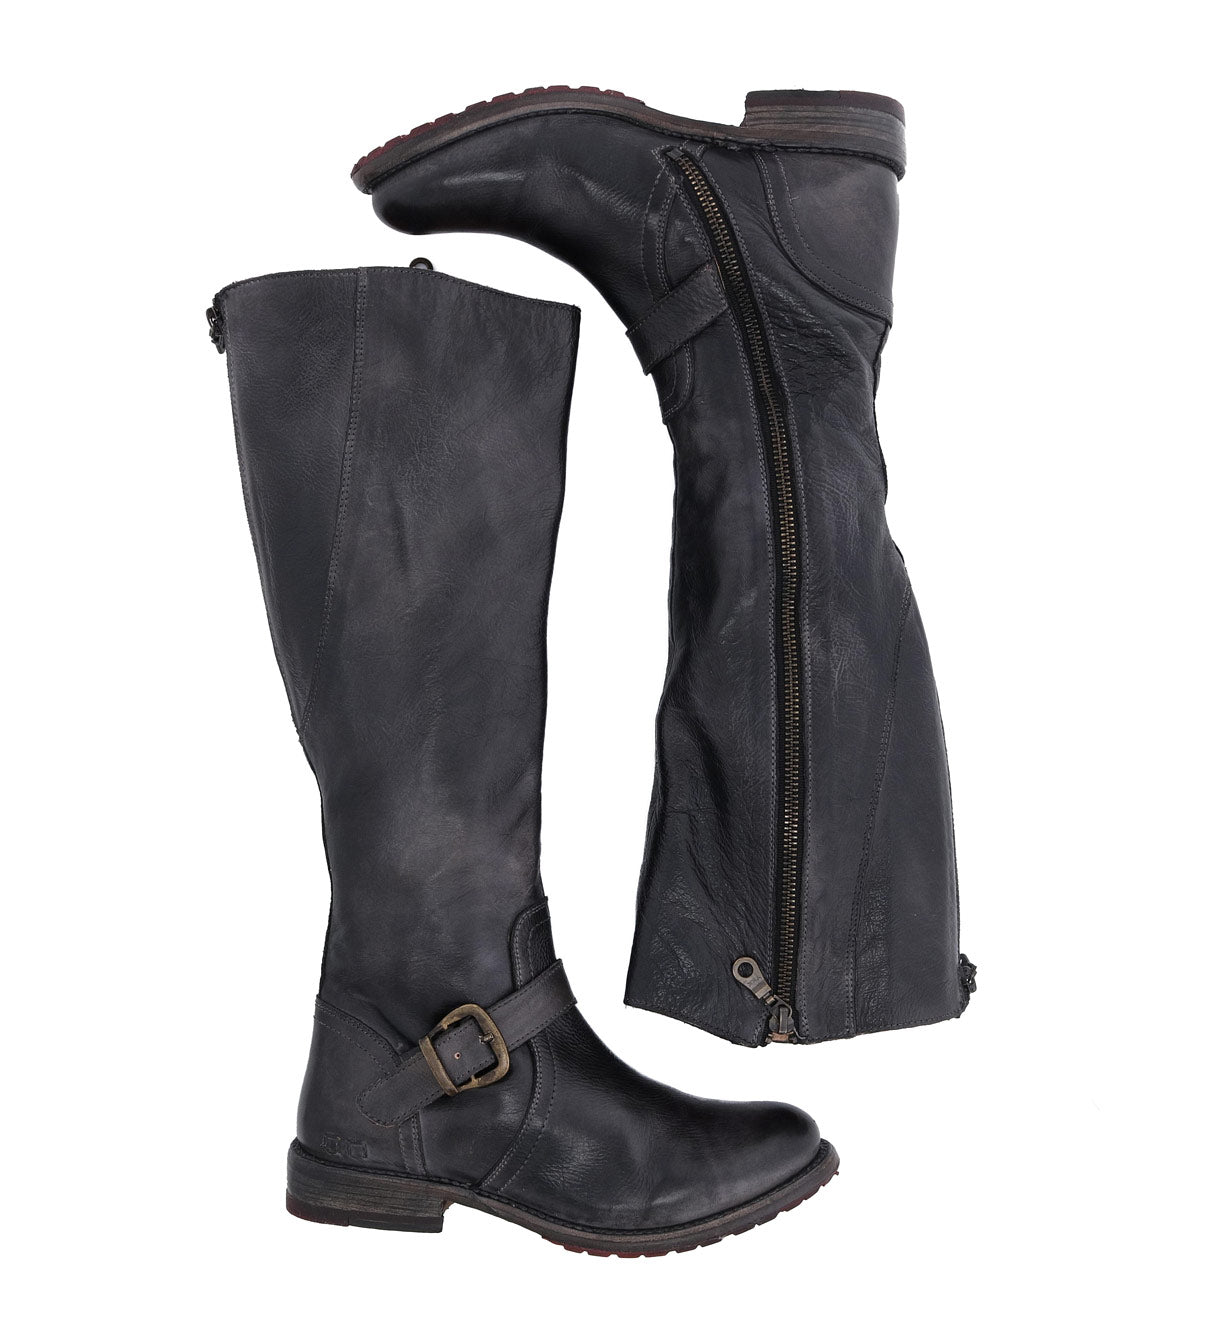 A pair of black leather Glaye boots with buckles and zippers by Bed Stu.